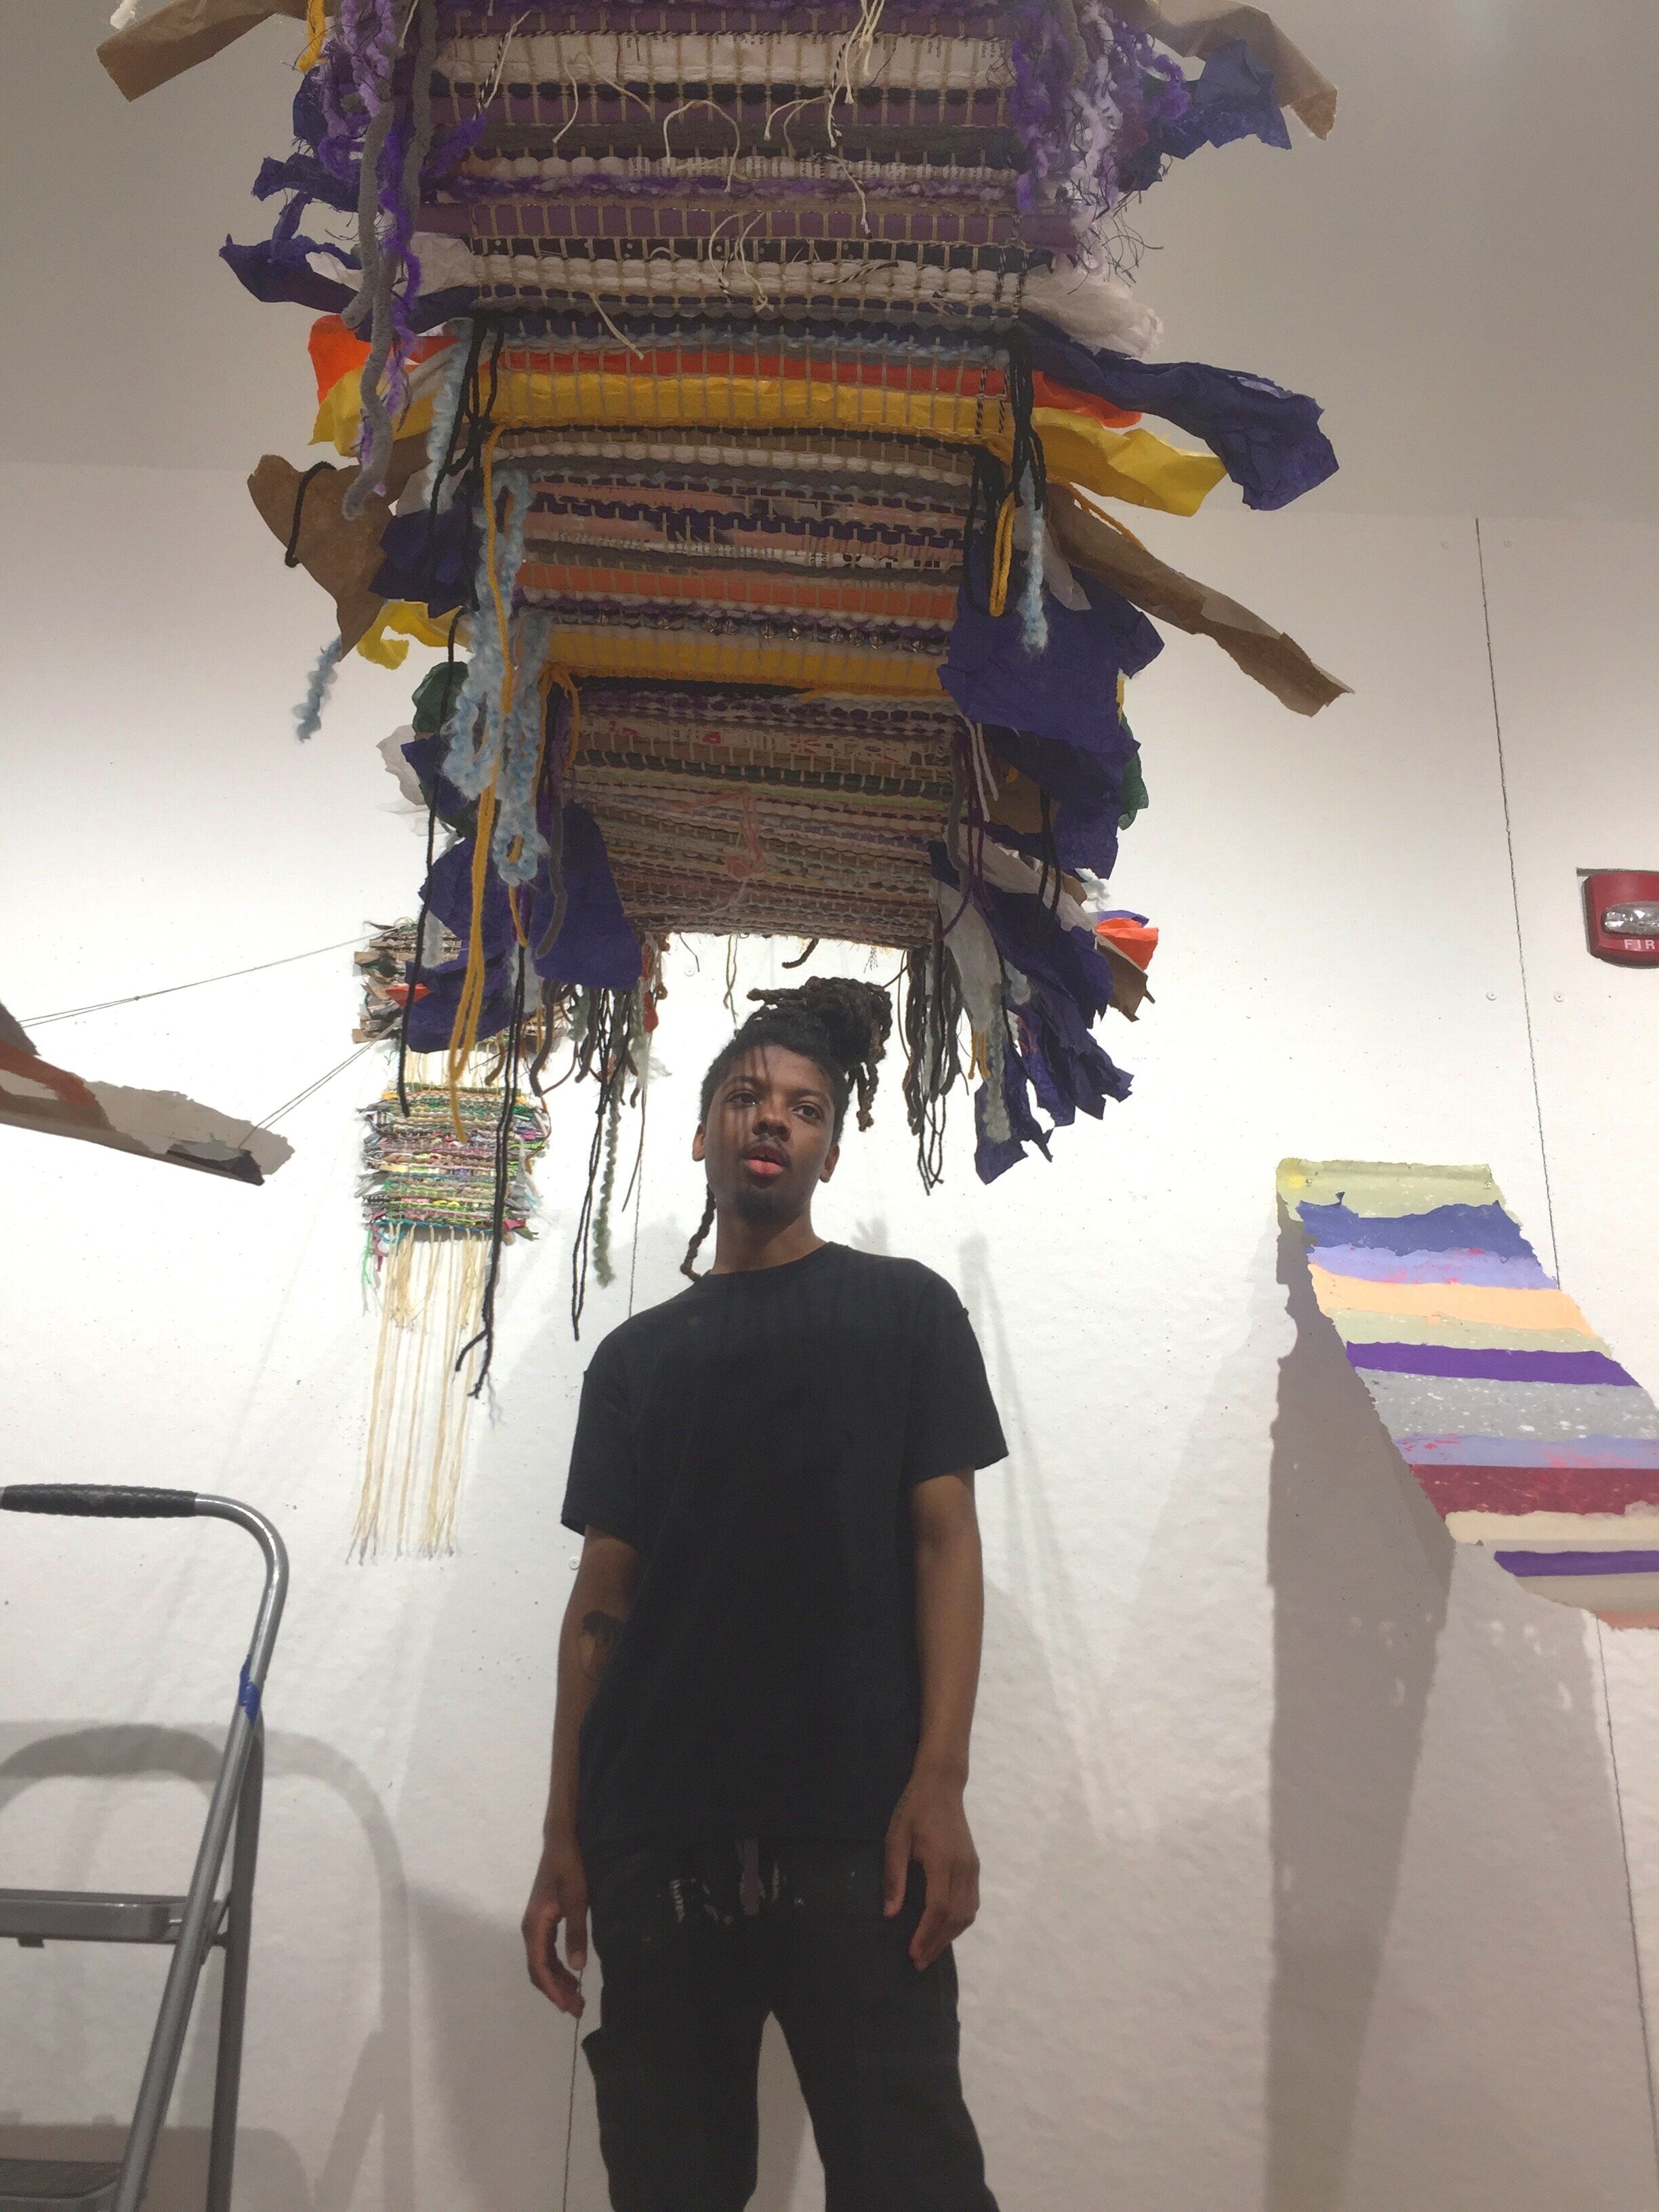   Student, Philly Johnson stands underneath the work of Andrea Romero, who created a mobile weaving studio for her train commute.  